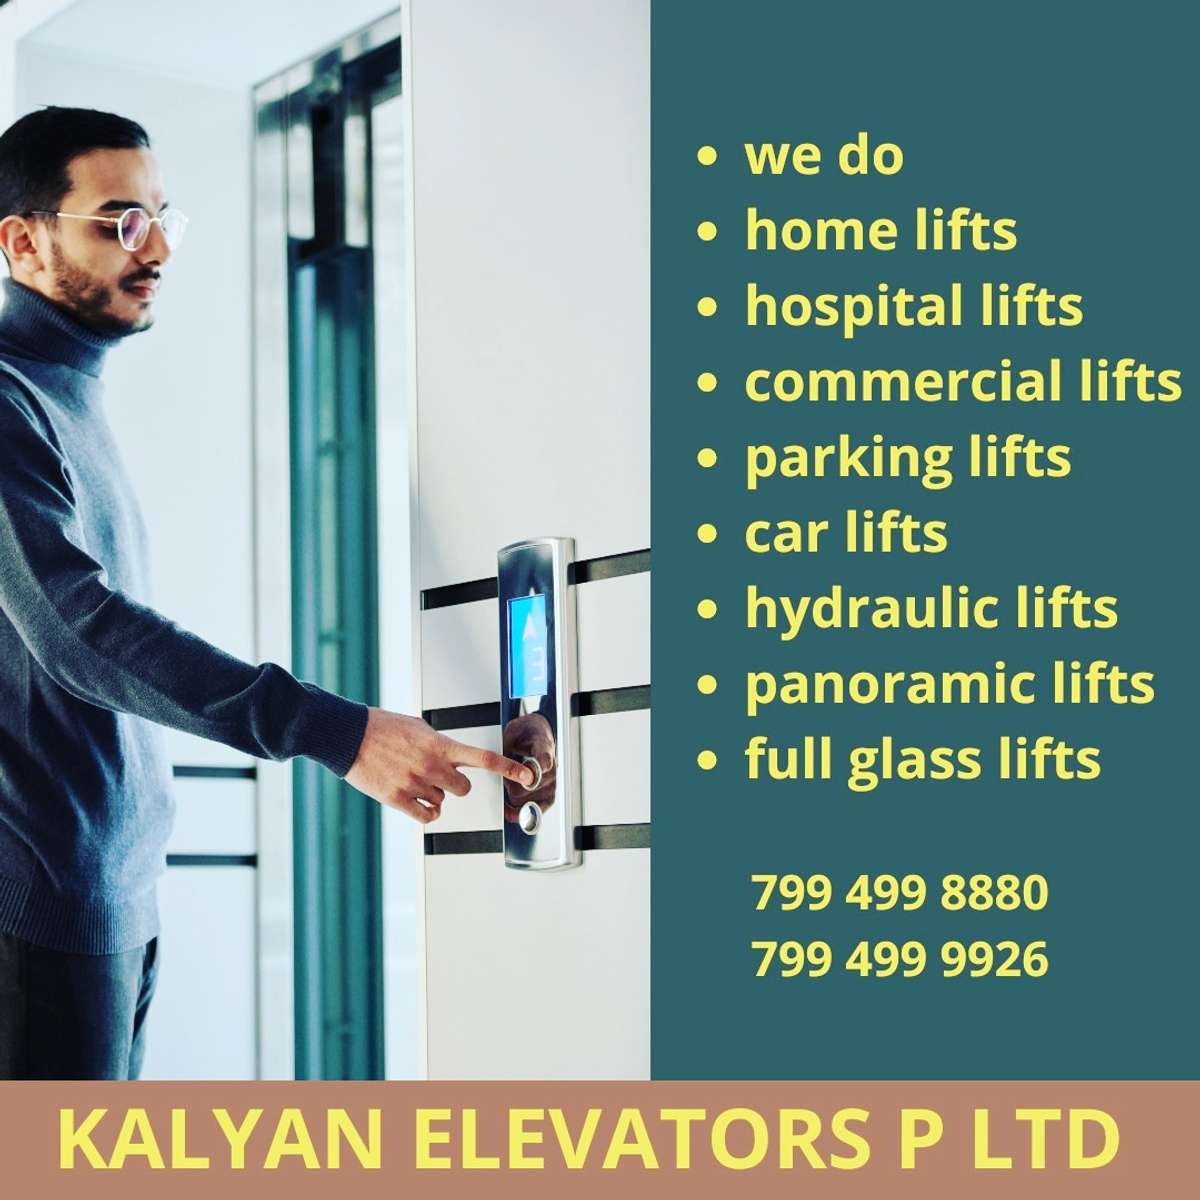 related new home lifts and home theatre contact please